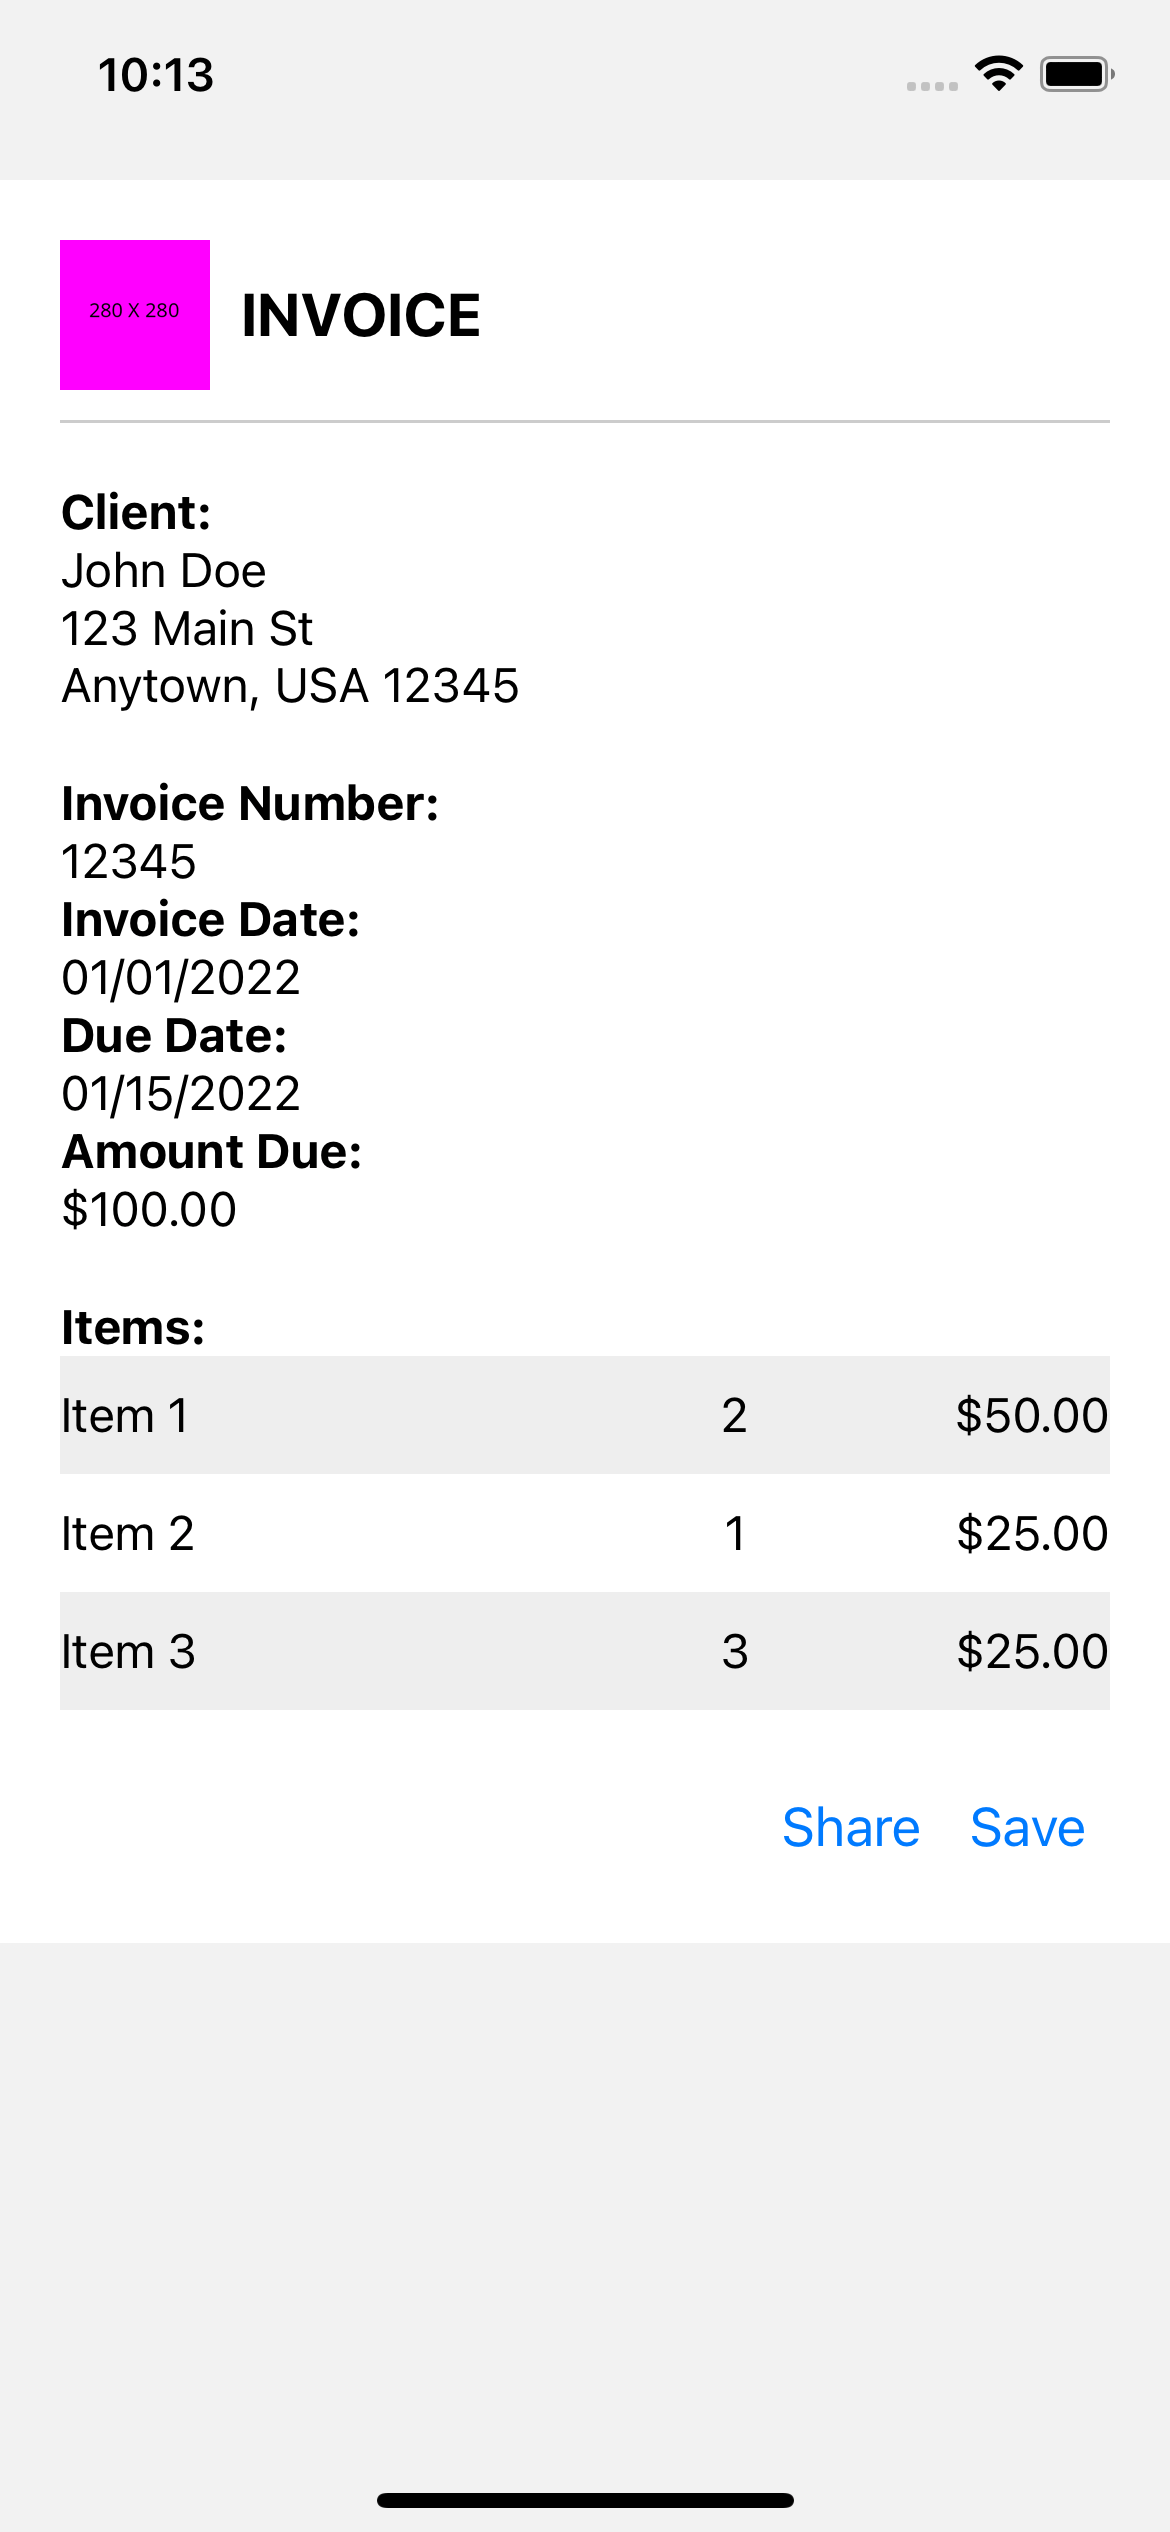 React native template. Invoice with logo and styled items